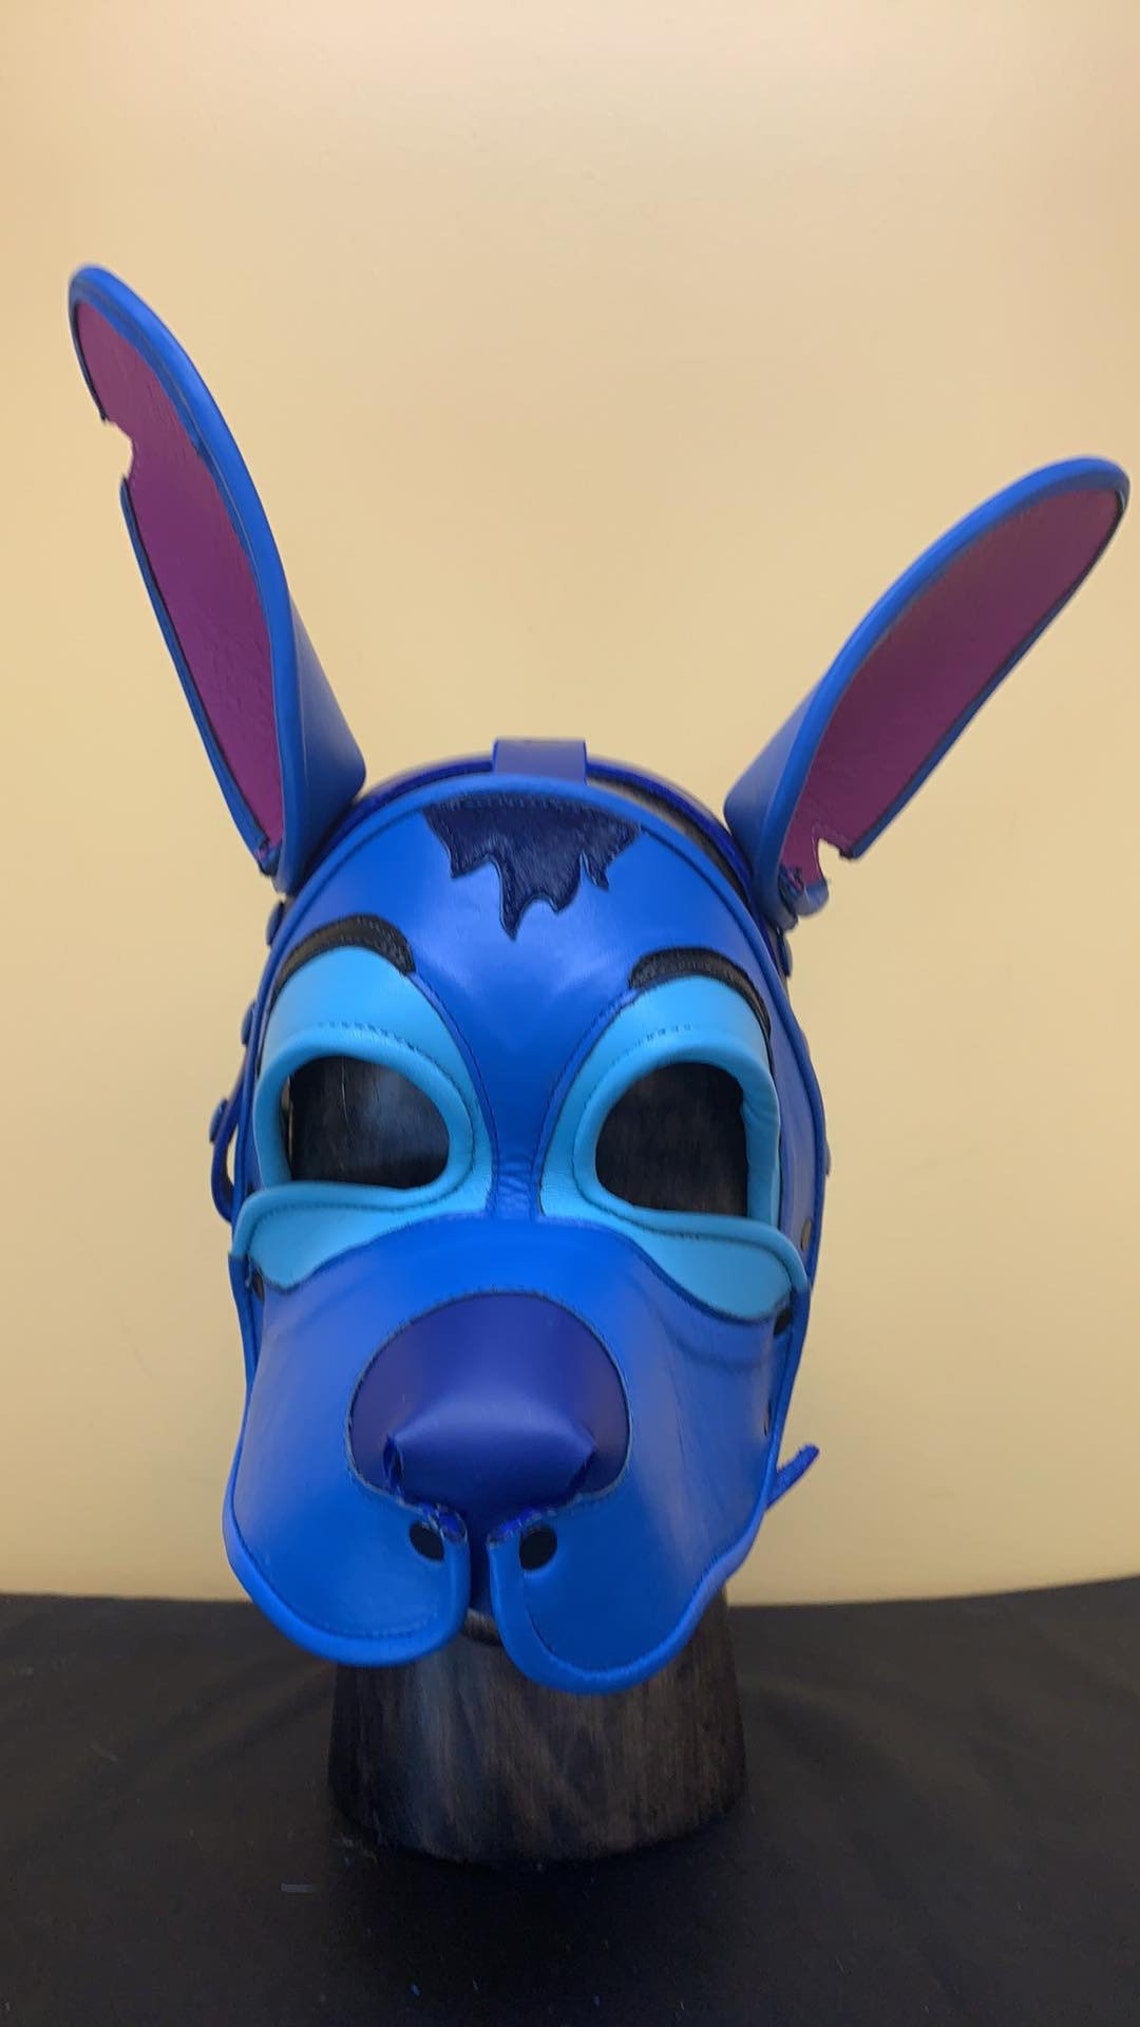 Stitch Leather Pup Mask, front view.